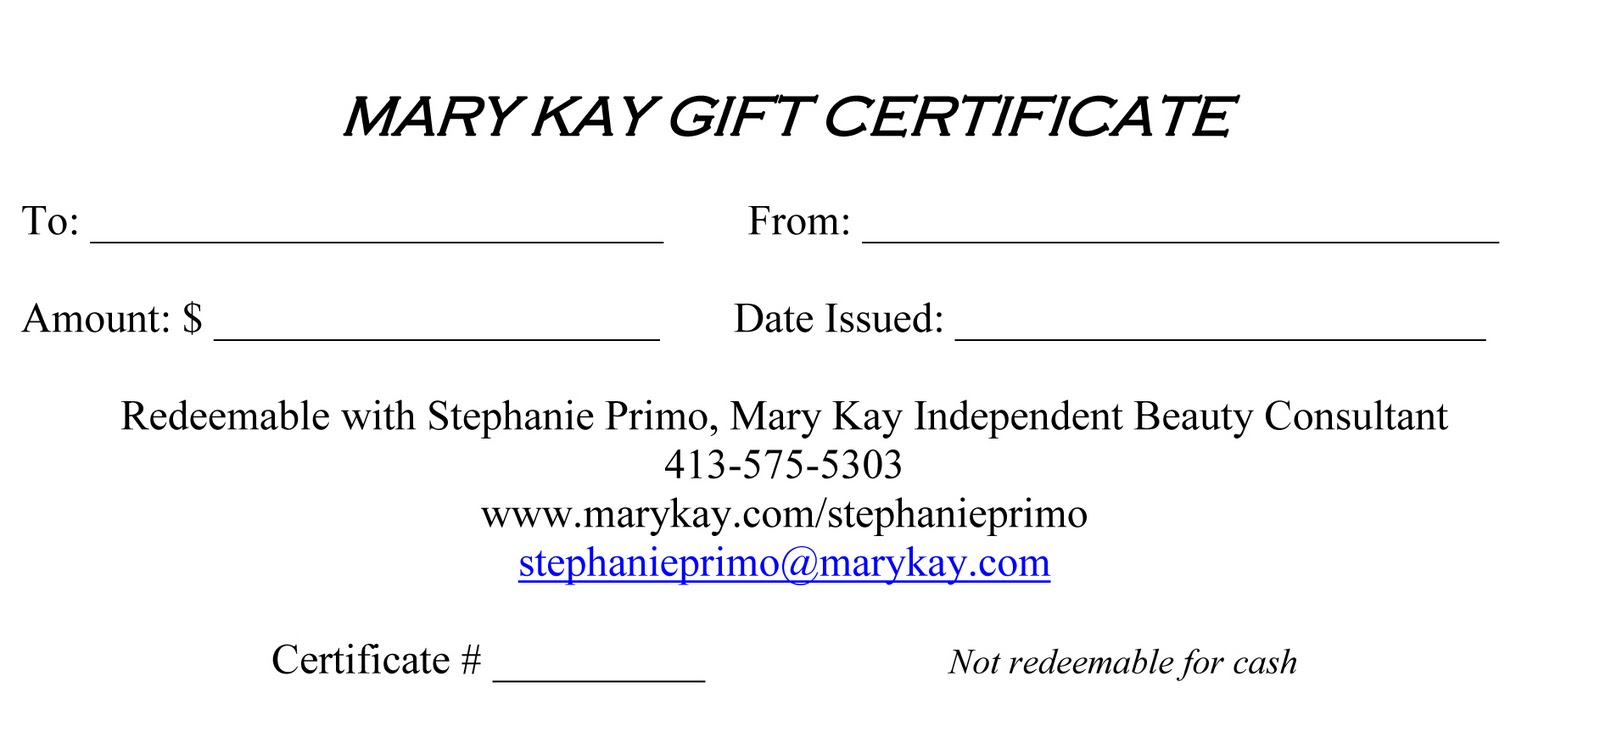 11 Best Photos Of Mary Kay Gift Cards Printable – Mary Kay Throughout Mary Kay Gift Certificate Template